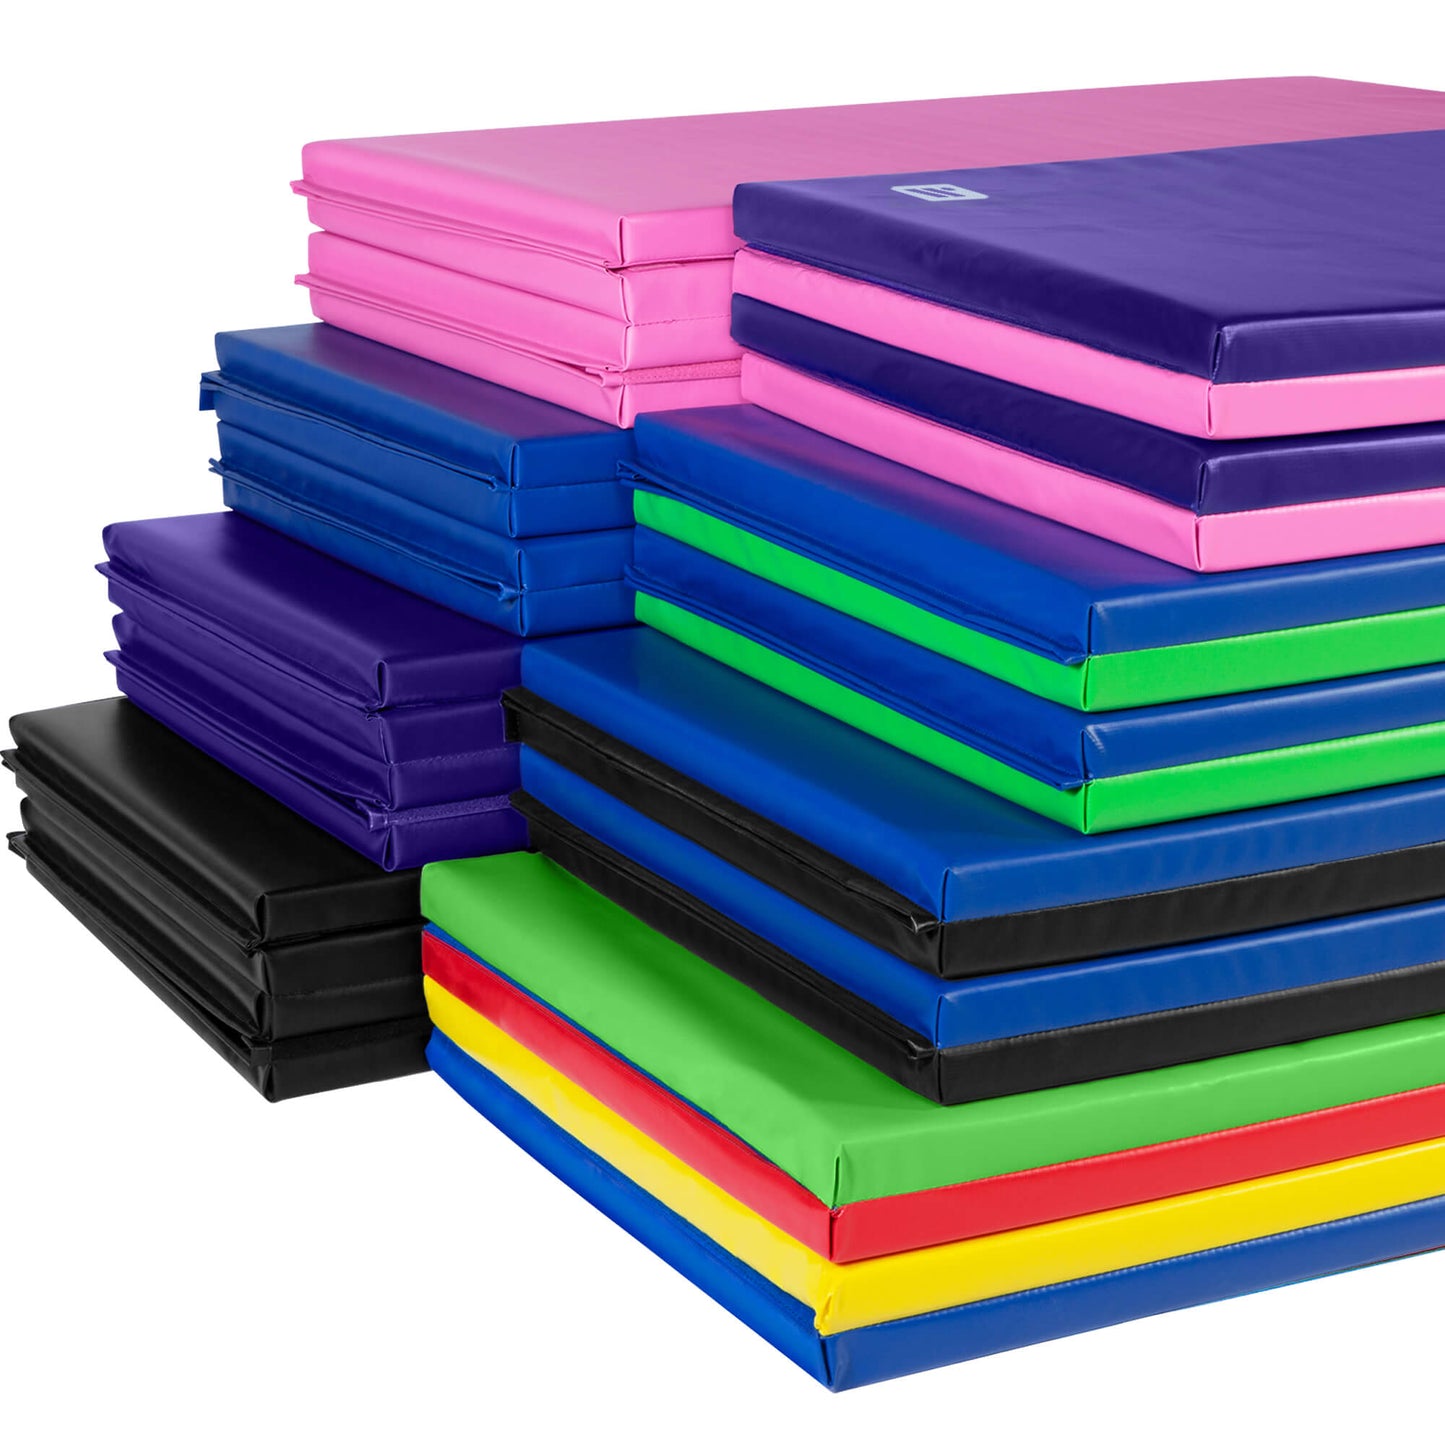 Stacked 4x10 Exercise Mats in Multiple Colors